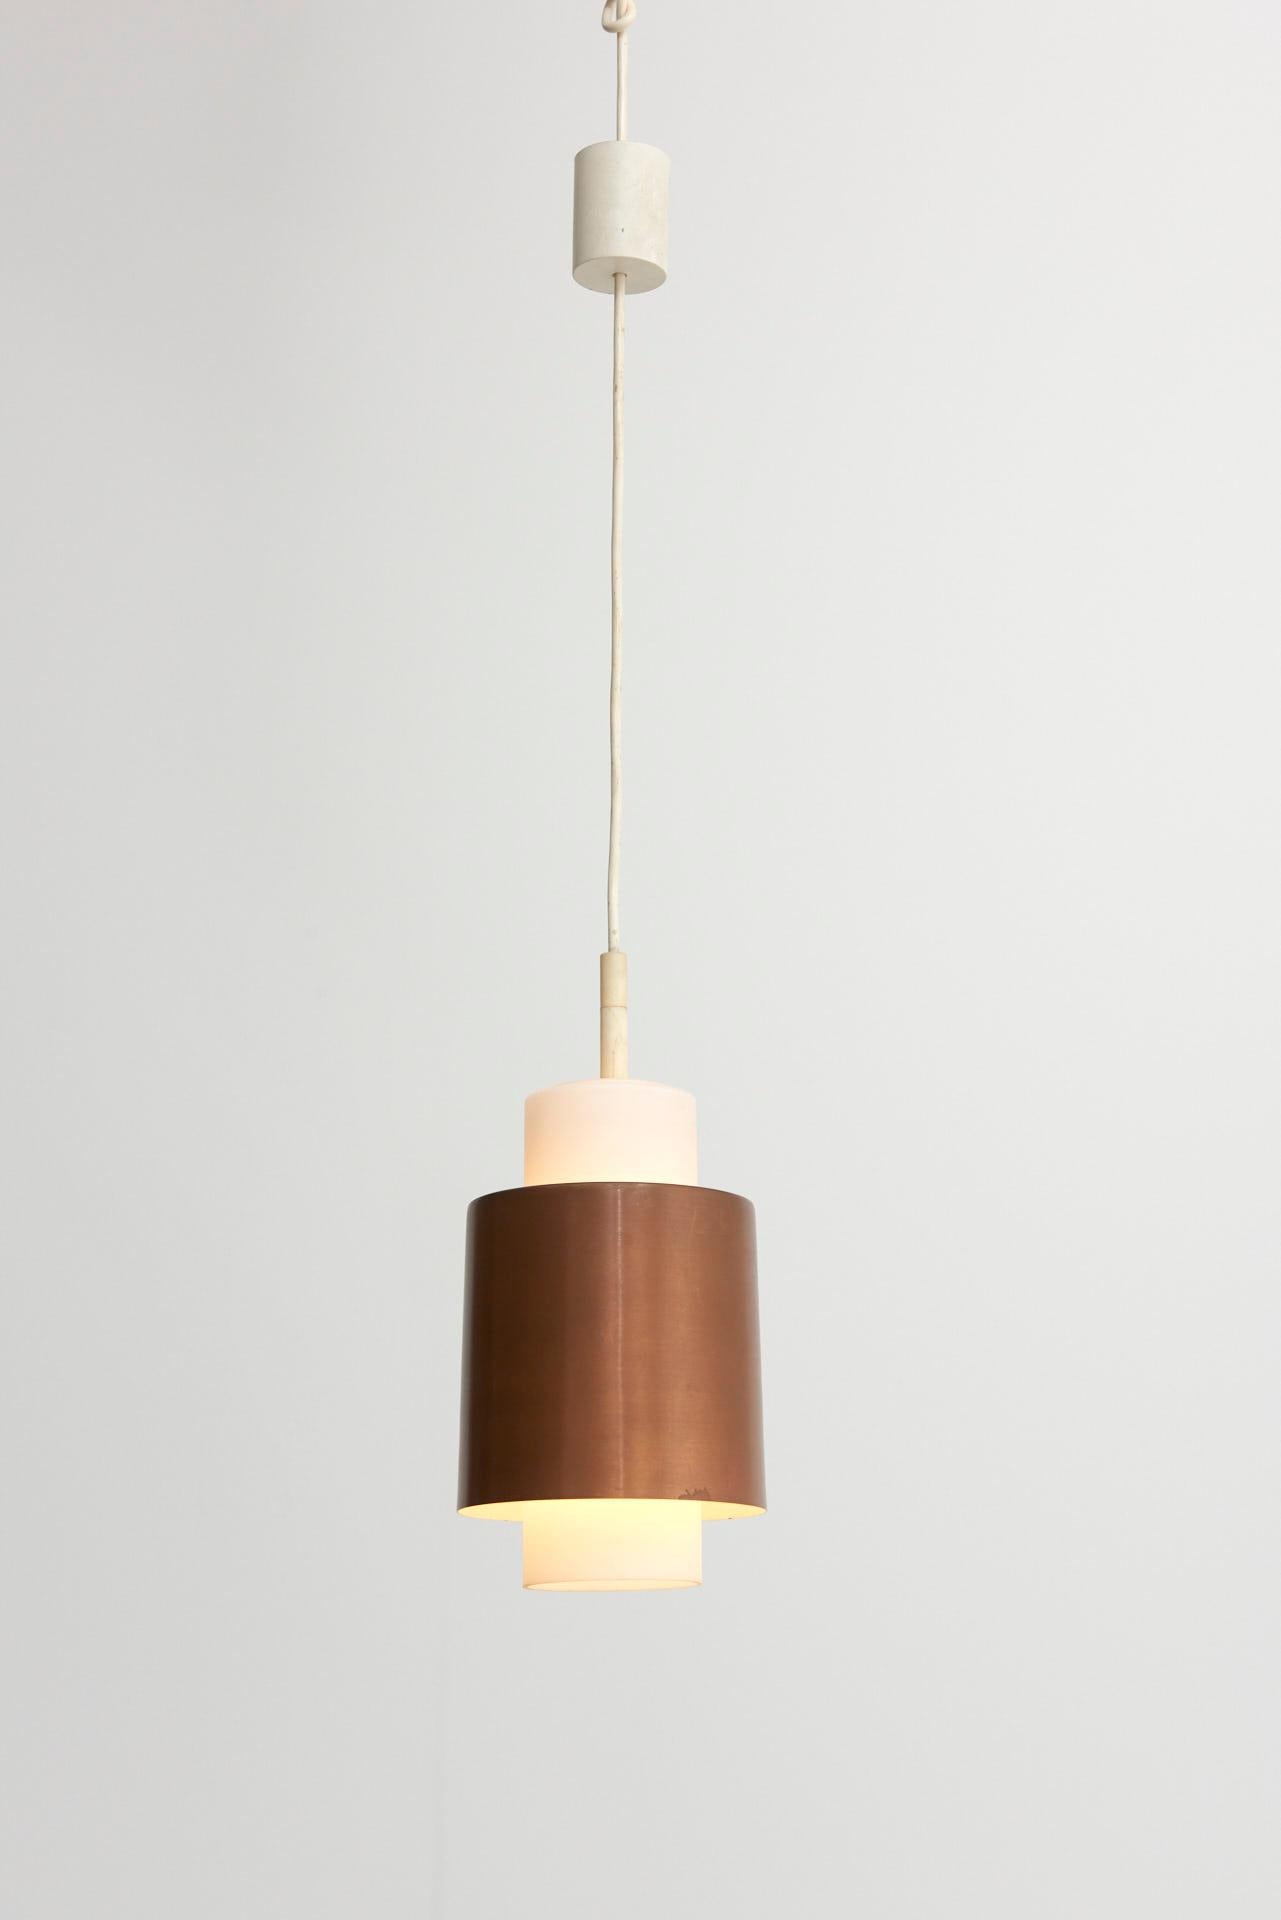 A set of 3 pendant lamps, consisting of an opal glass core with lamp shade in red copper.